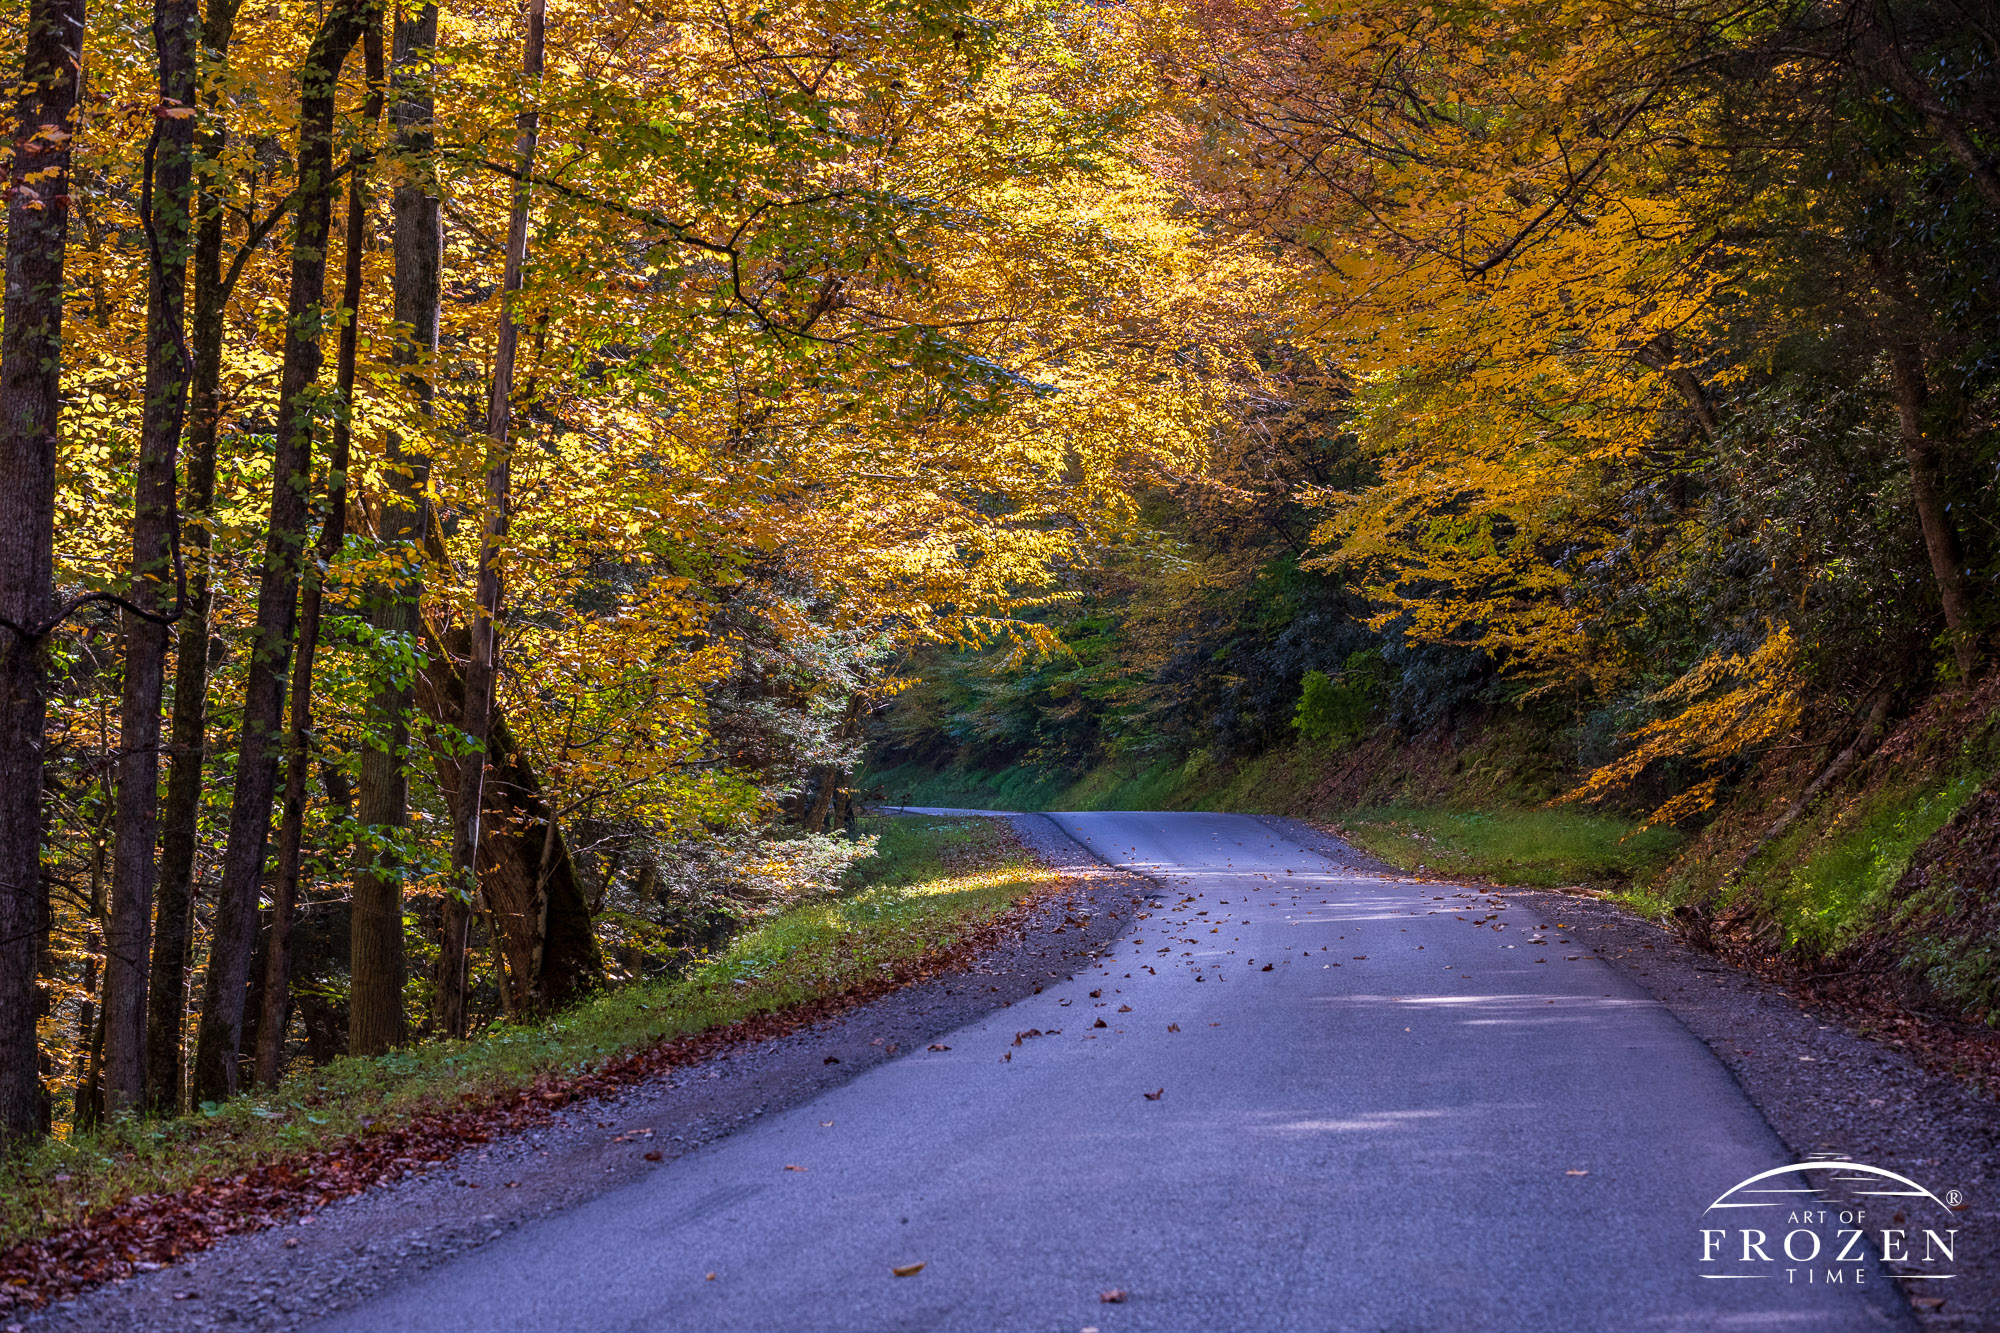 West Virginia Fine Art Photography featuring the Mountaineer Highway as it forms soothing serpentine curves through the fall color.